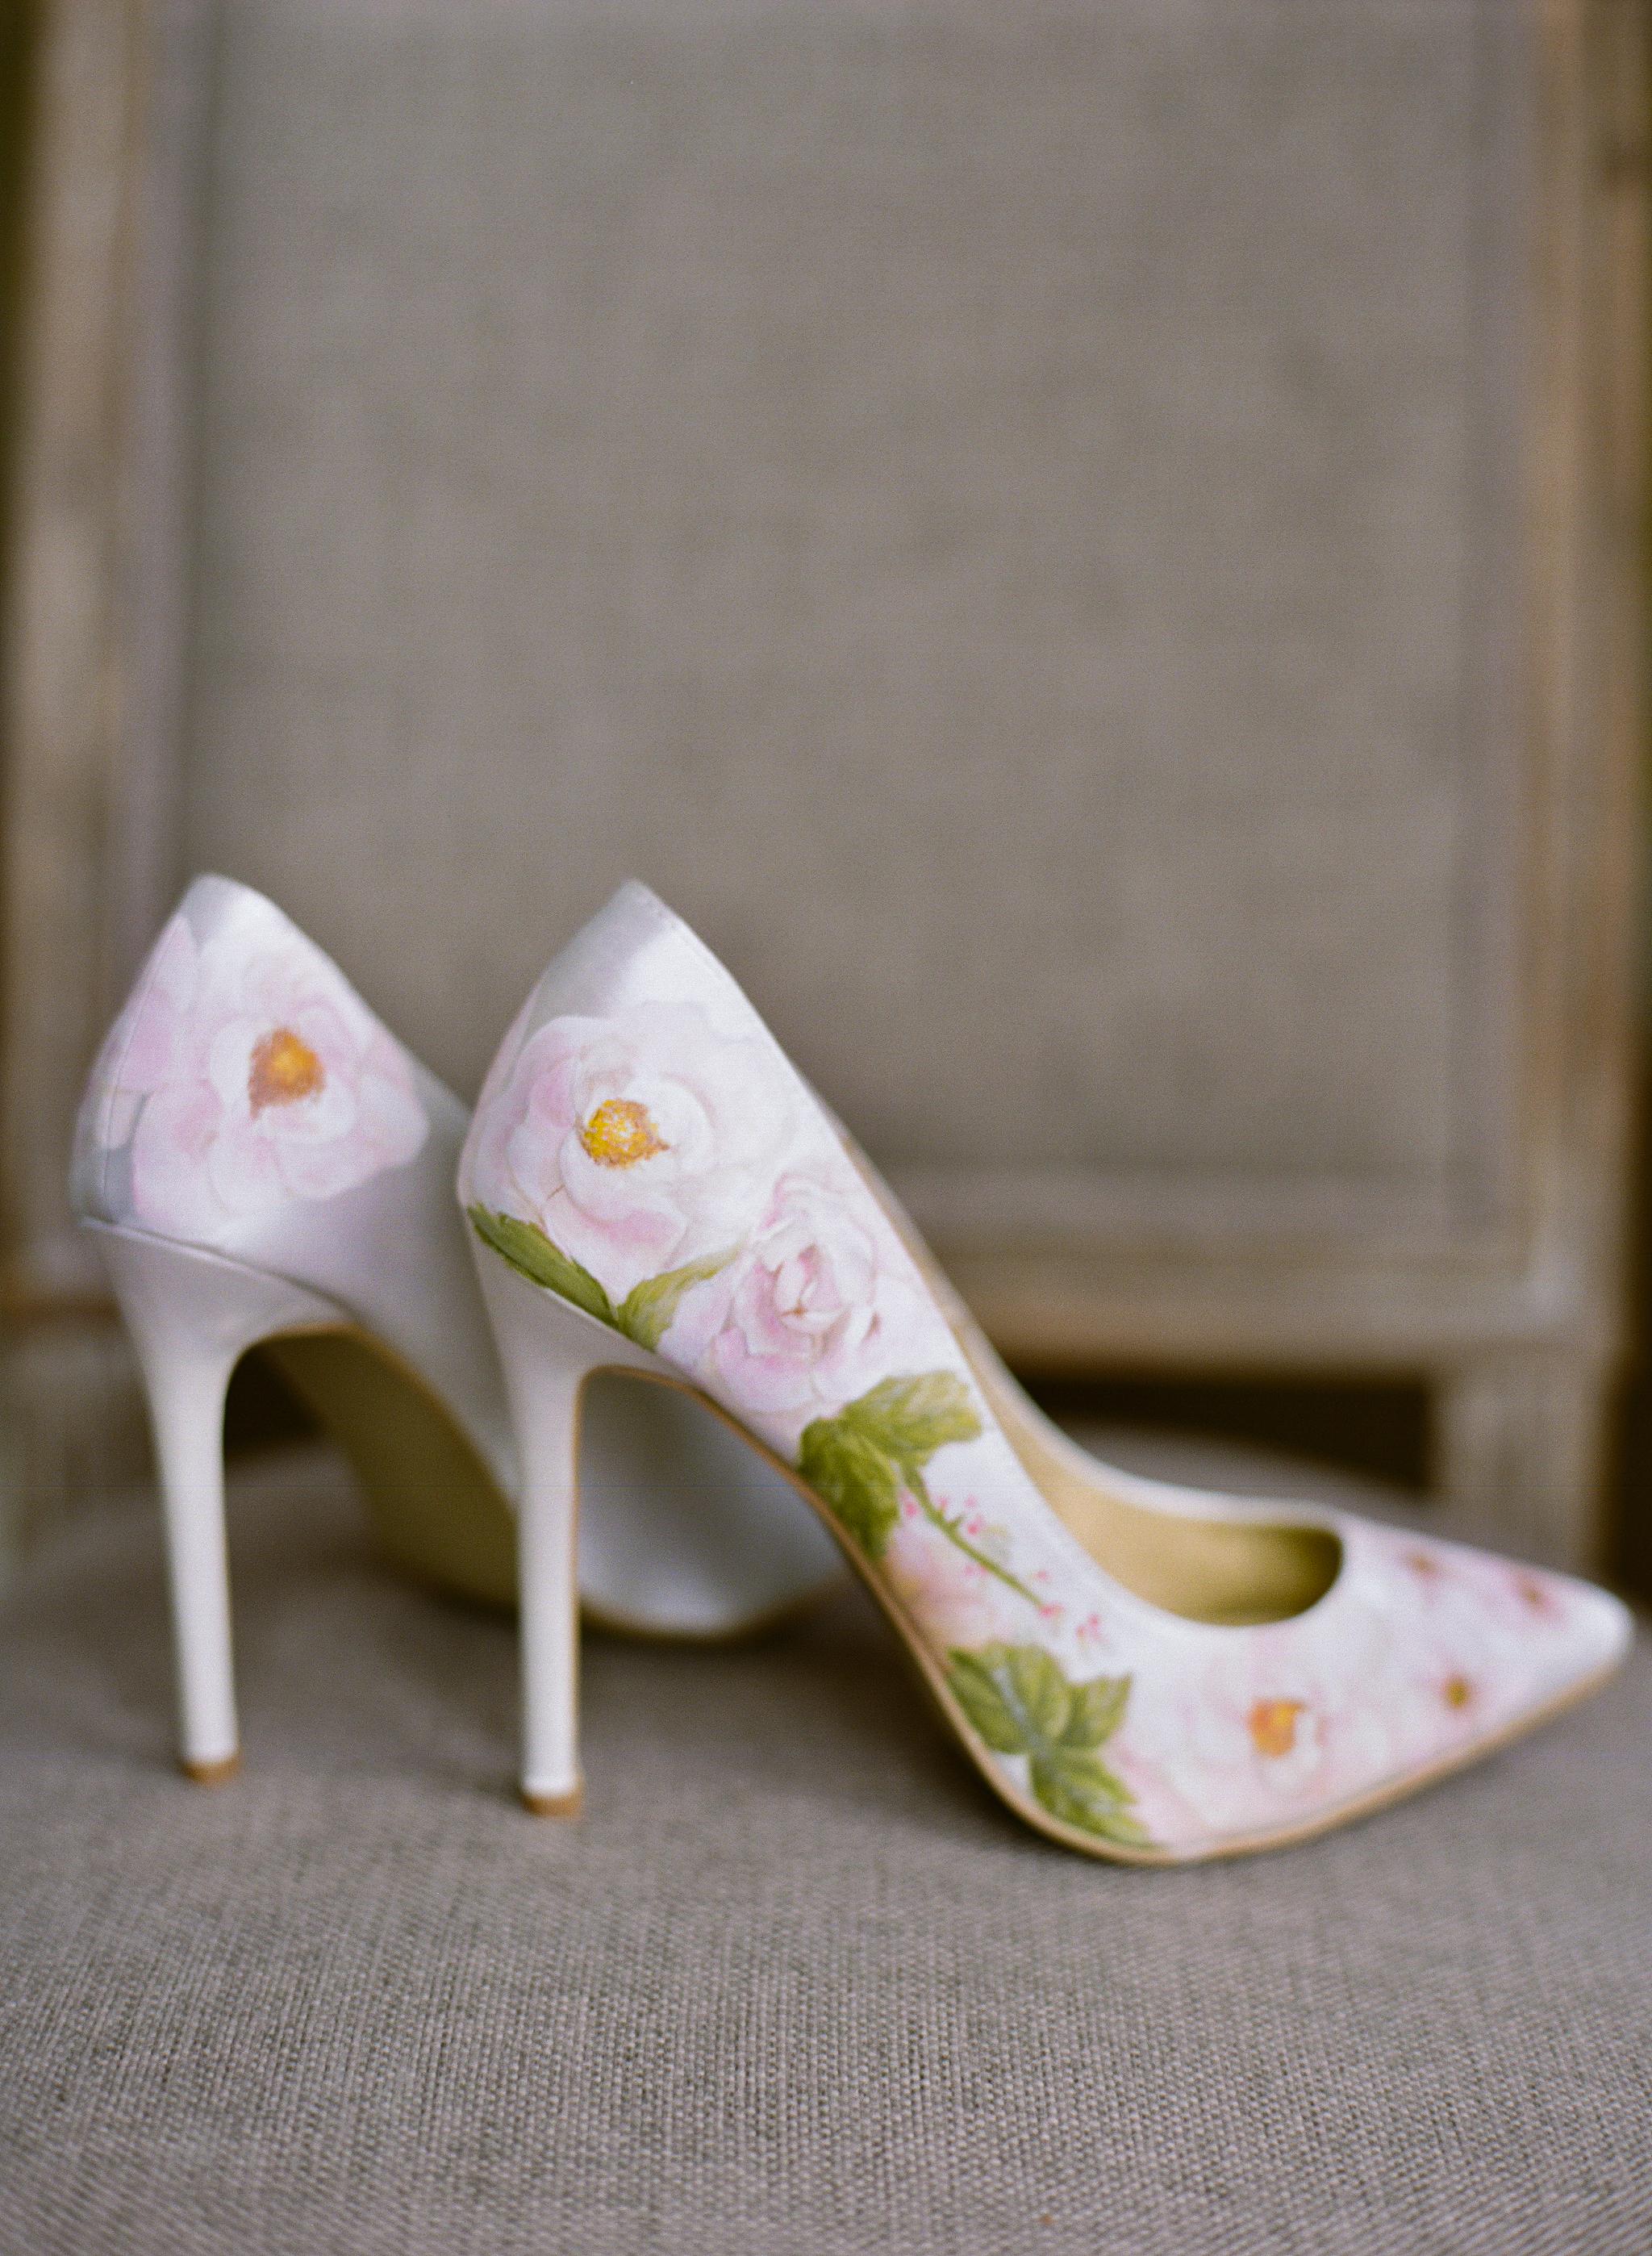 Wedding Shoes Handpainted High Heels for Women Handpainted Schoenen damesschoenen Pumps Handpainted Shoes with Cherry Blossom 